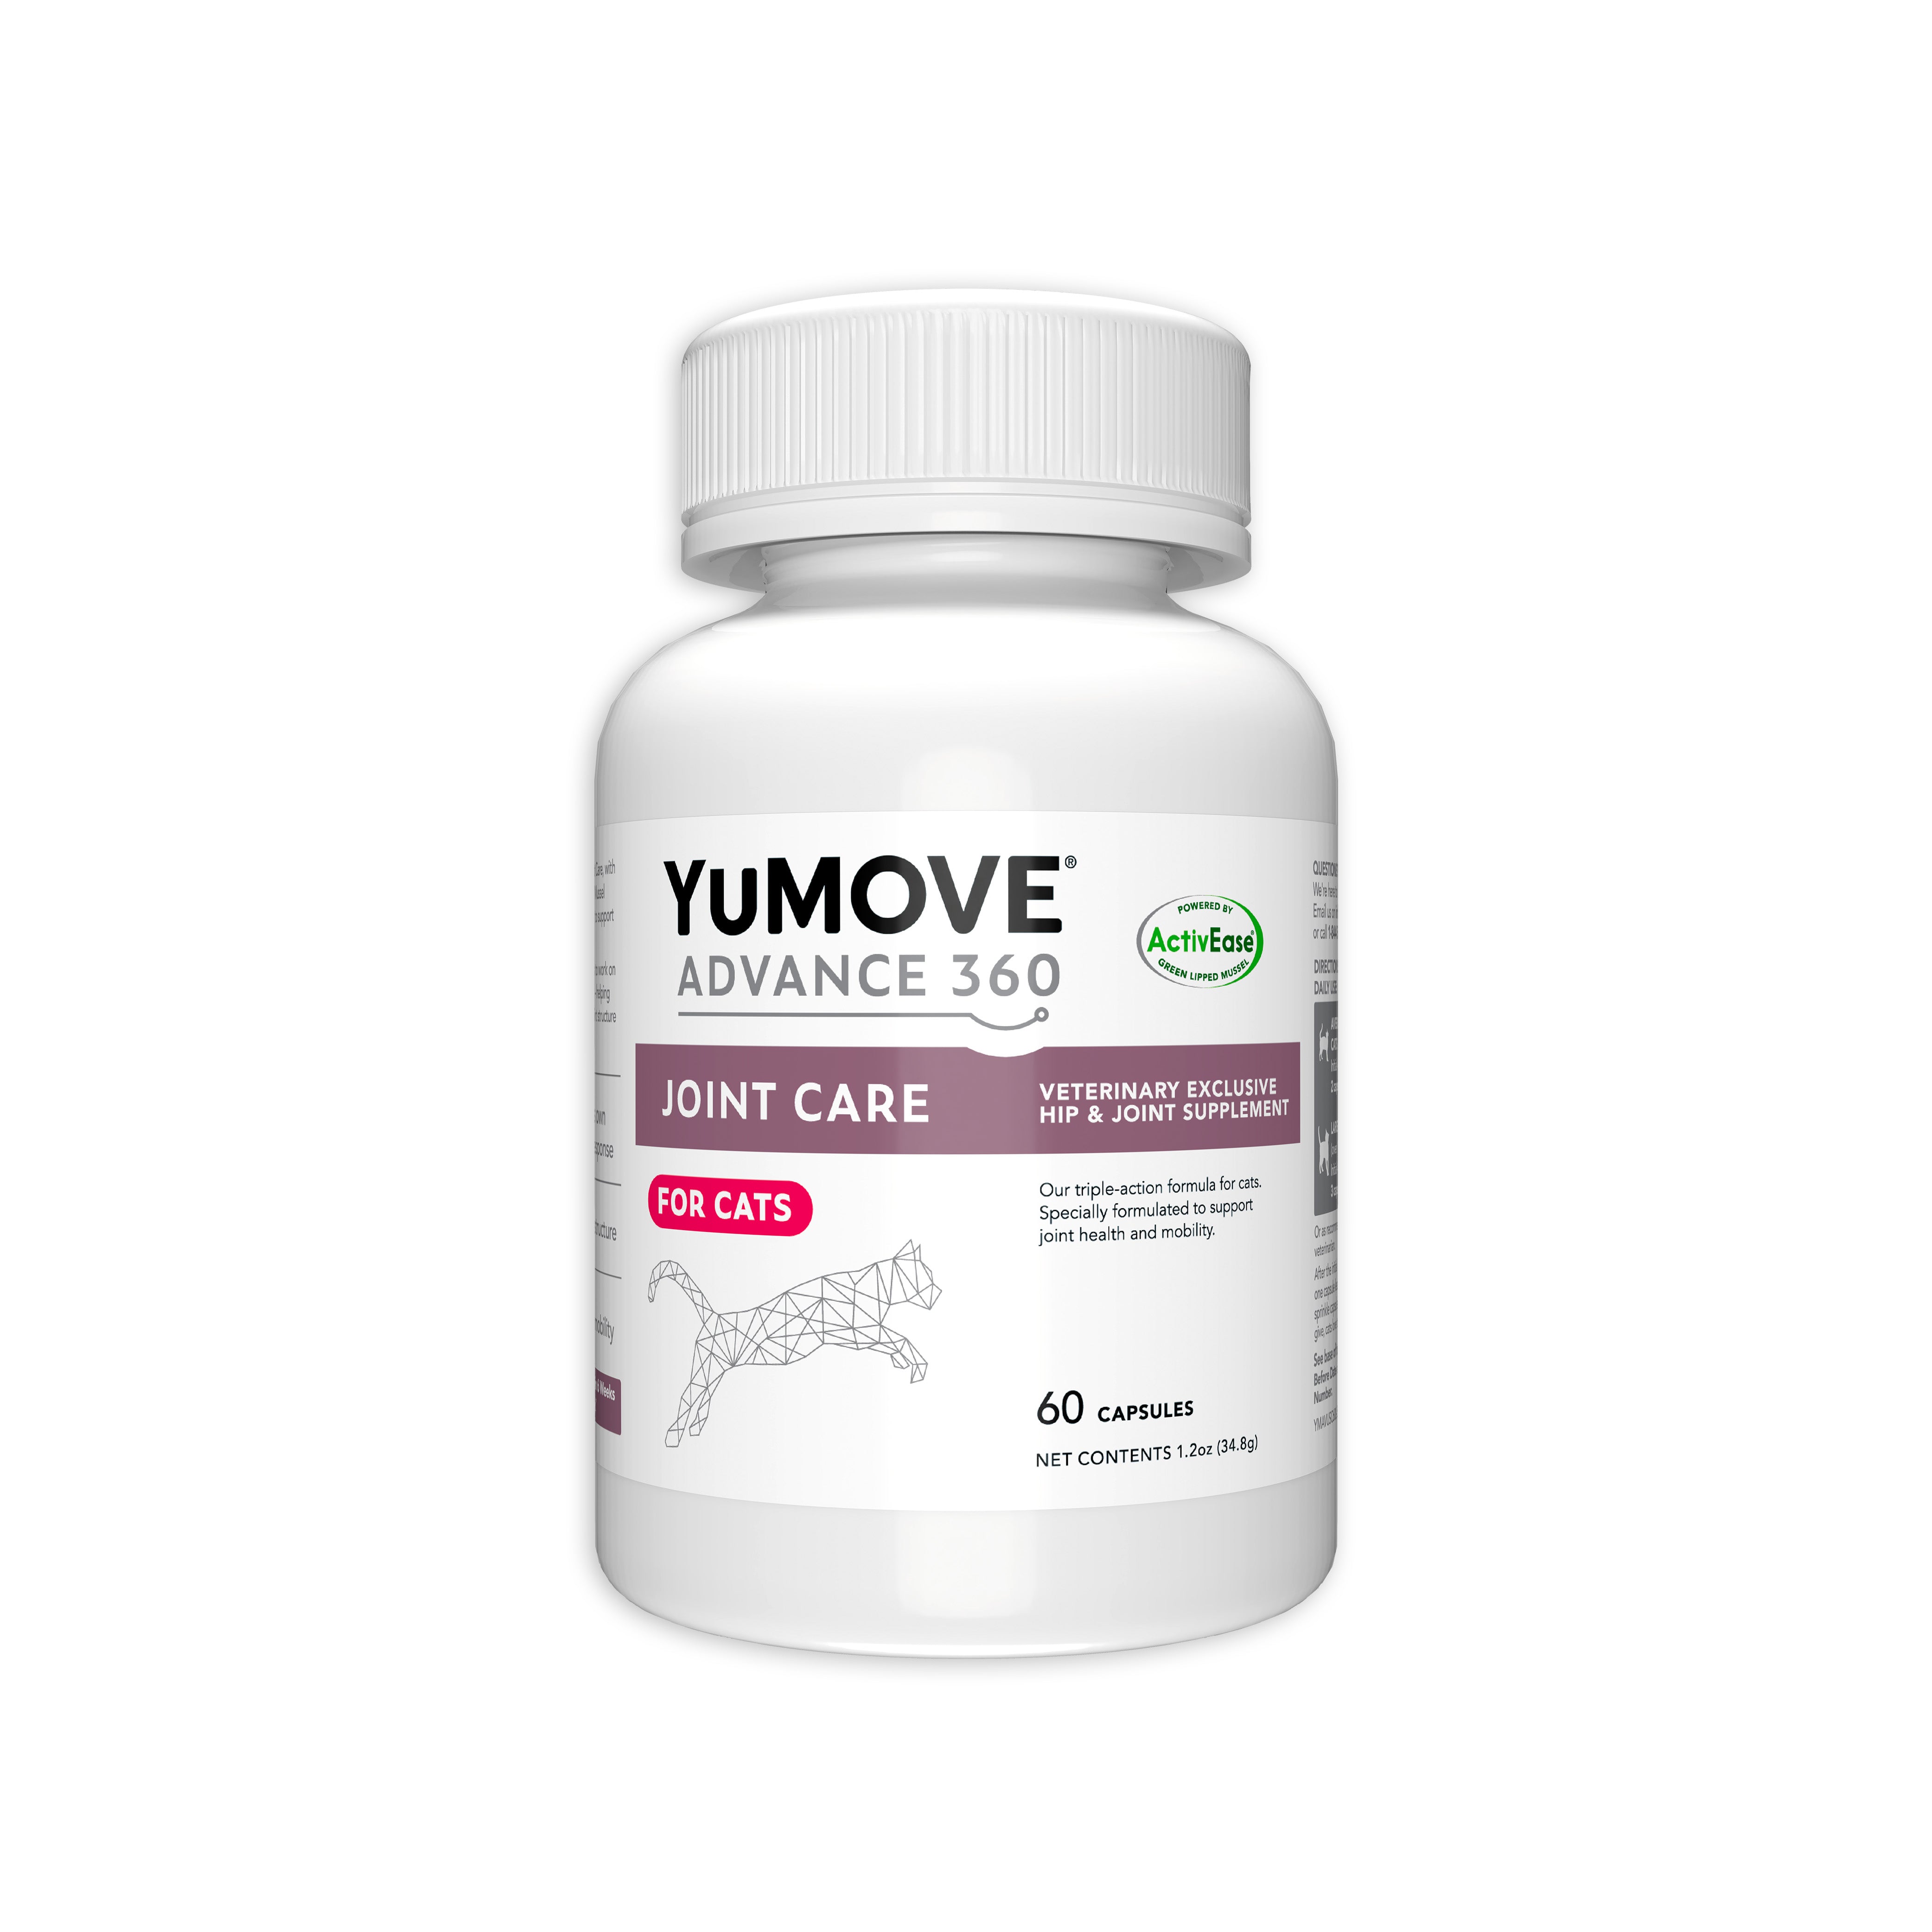 A white bottle of YuMOVE ADVANCE 360 Joint Care for Cats, with a geometric wireframe cat illustration, labeled as a veterinary exclusive hip & joint supplement, containing 60 capsules with net contents of 1.2 oz (34g).